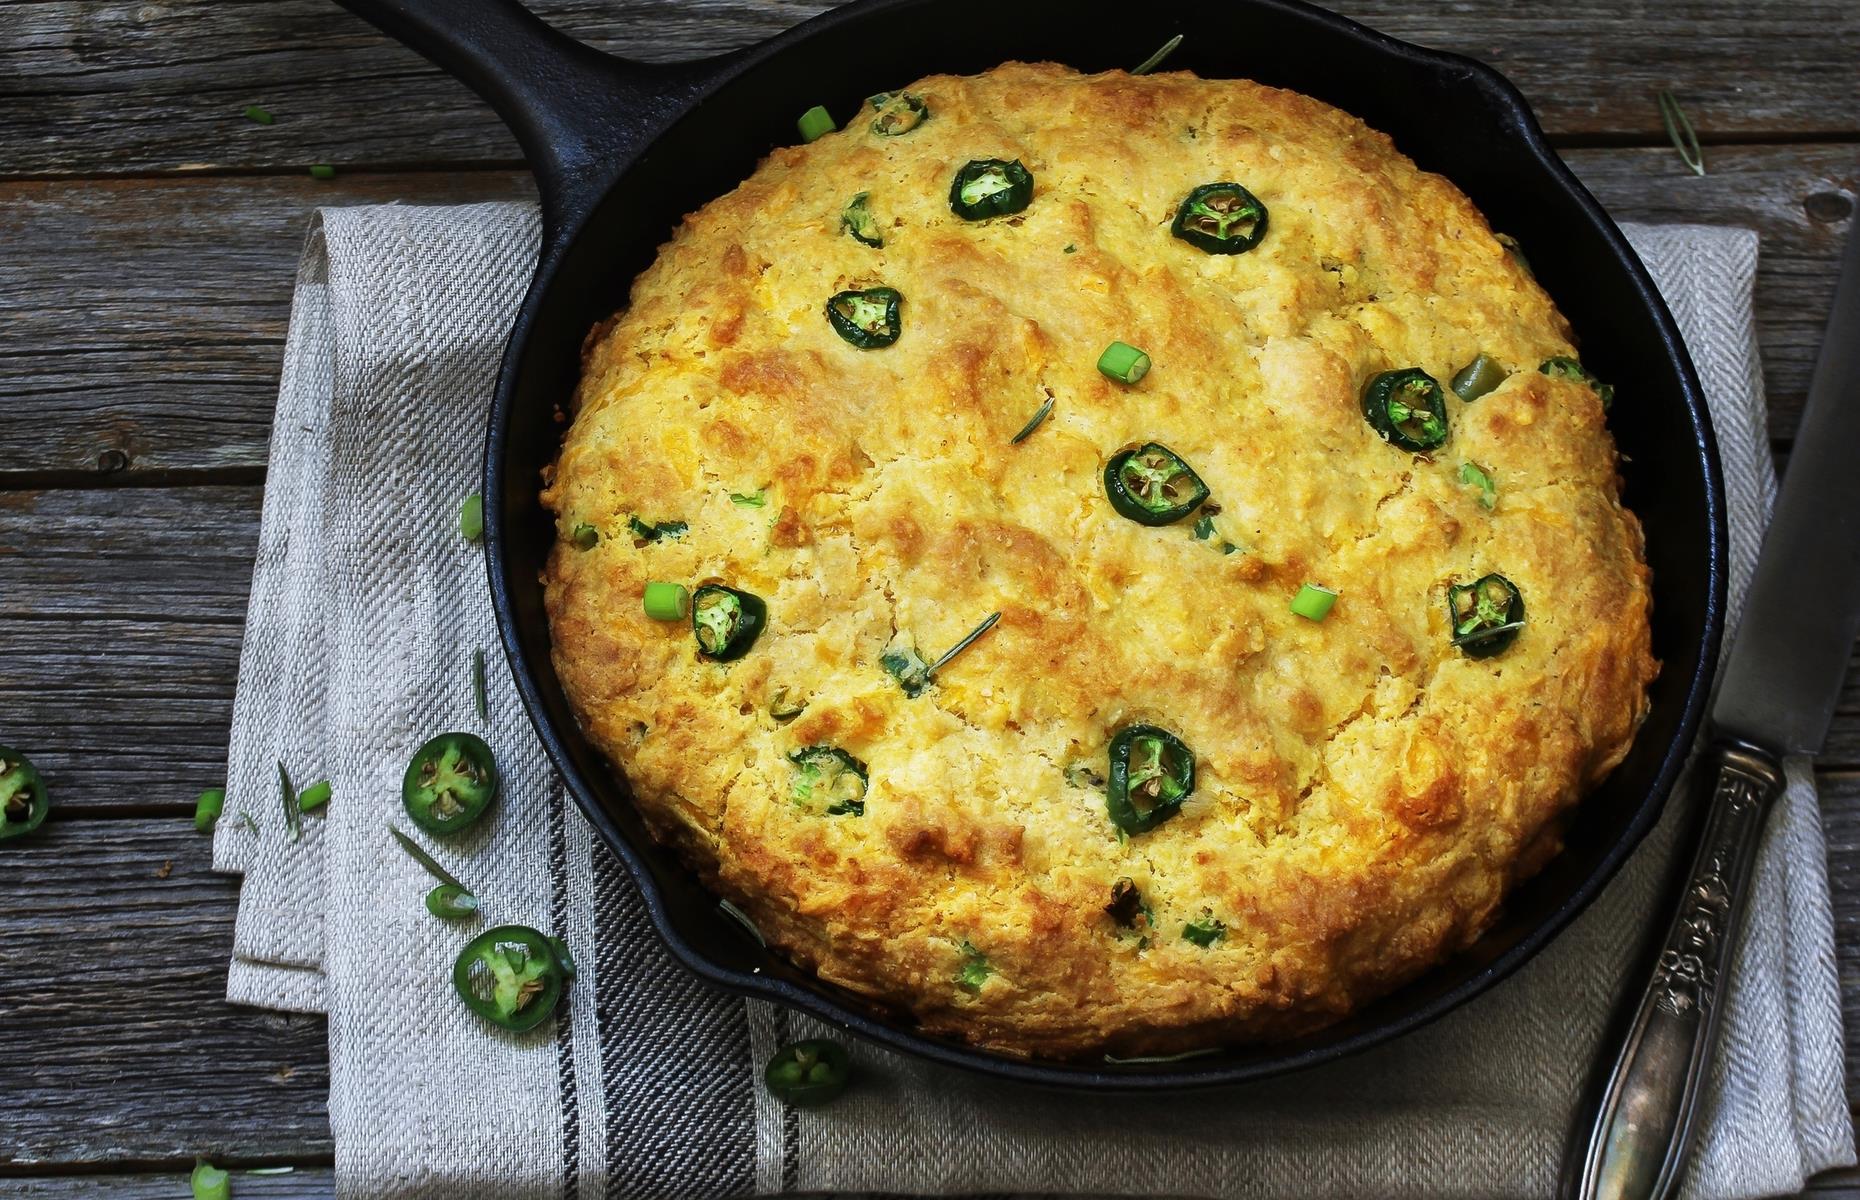 <p>This easy oven-baked cornbread is loaded with cheese and a sweetcorn purée. It also contains quark, a low-fat soft cheese, but you can substitute it with Greek yogurt or crème fraîche if you prefer. The brined jalapeños add a kick of heat and a little smokiness, while the Cheddar provides a rich sharpness for a sensational end result.</p>  <p><a href="https://www.lovefood.com/recipes/57323/cheddar-and-jalapeo-quark-cornbread-recipe"><strong>Get the recipe for Cheddar and jalapeño cornbread here</strong></a></p>